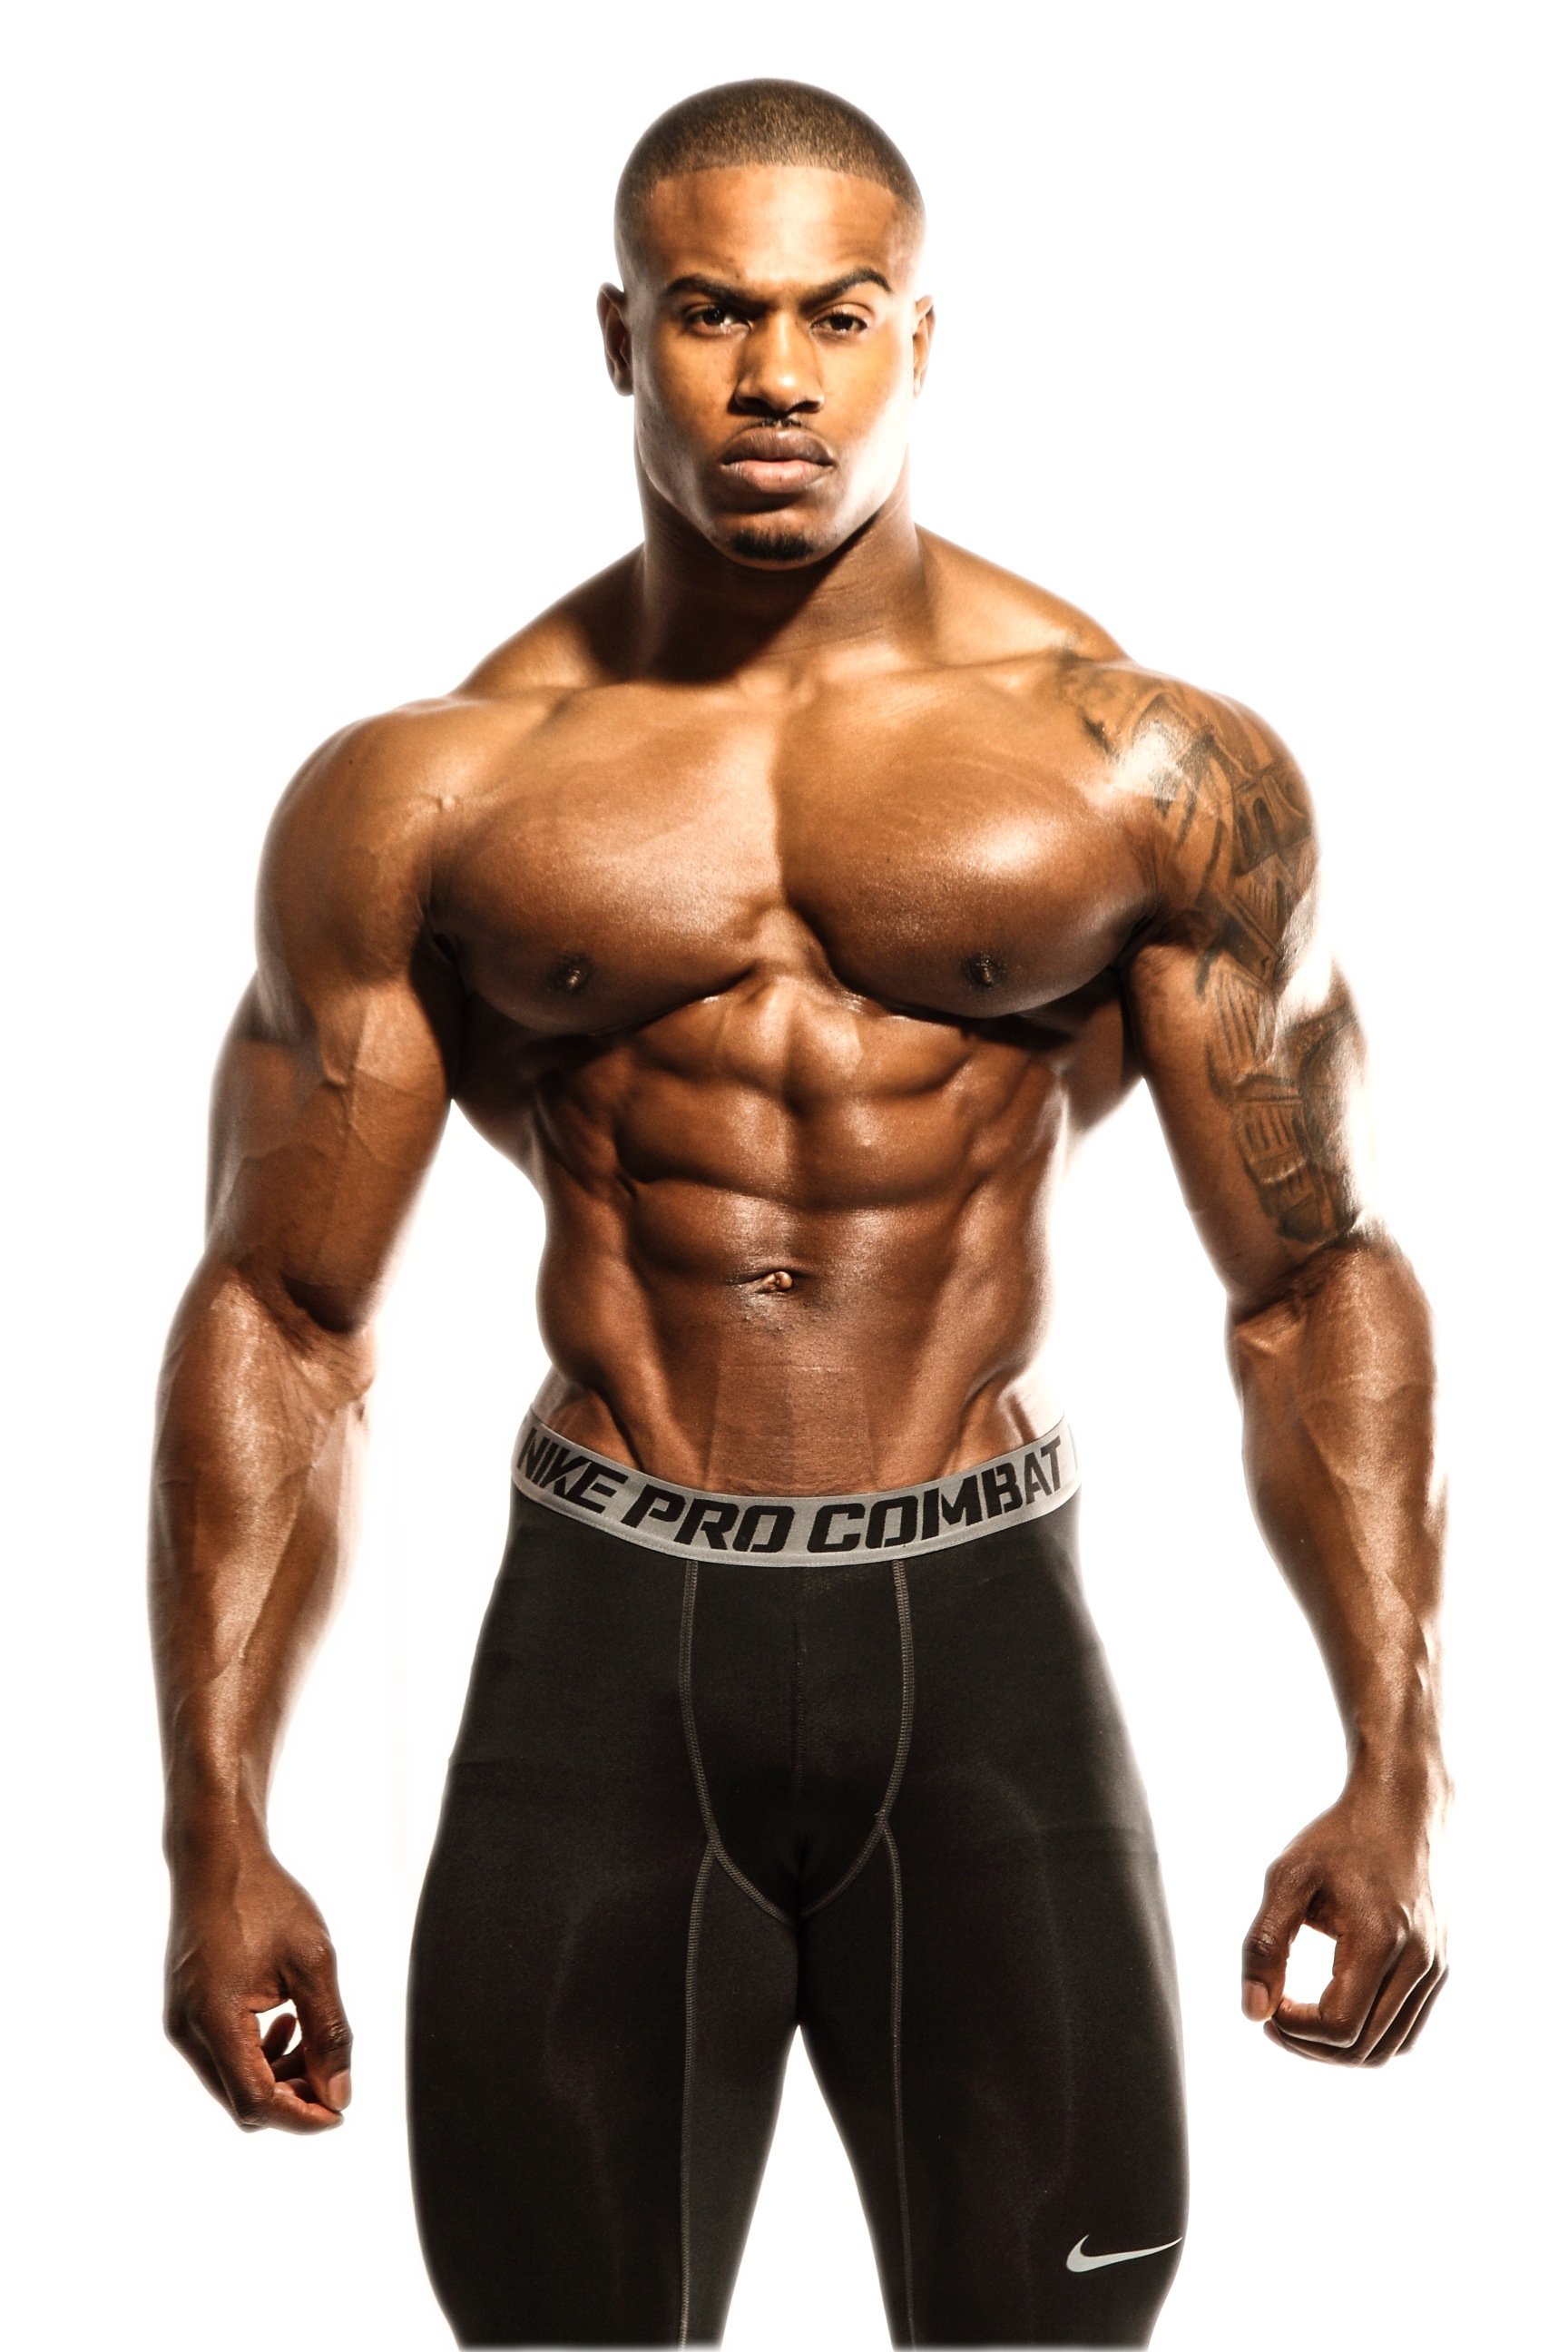 Abs PNG HD Isolated